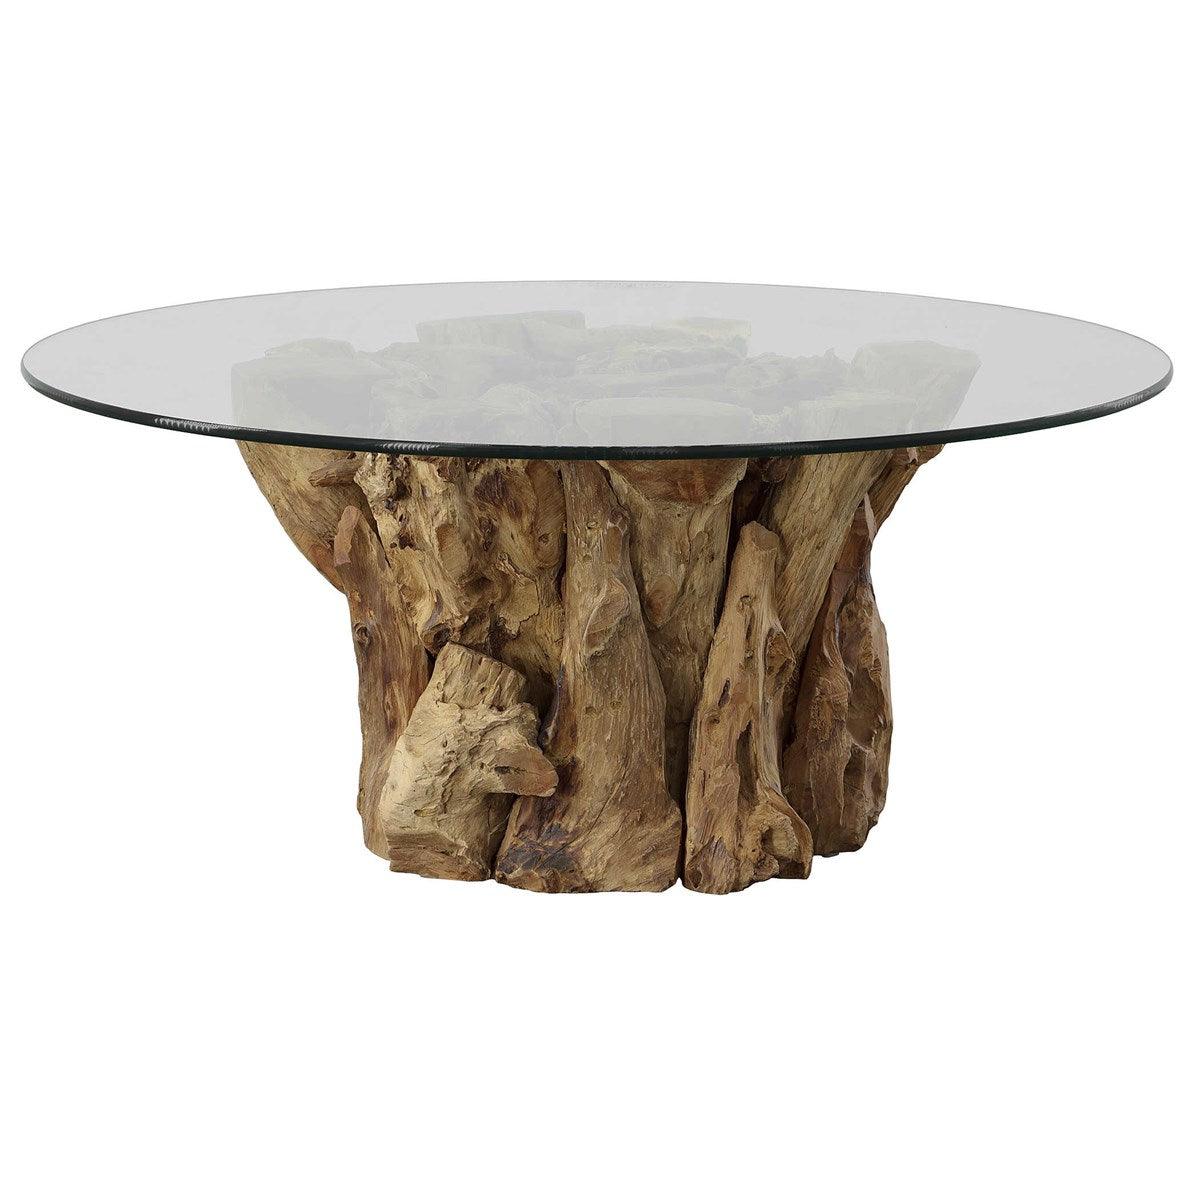 The Uttermost - Driftwood Coffee Table - 22876 | Montreal Lighting & Hardware